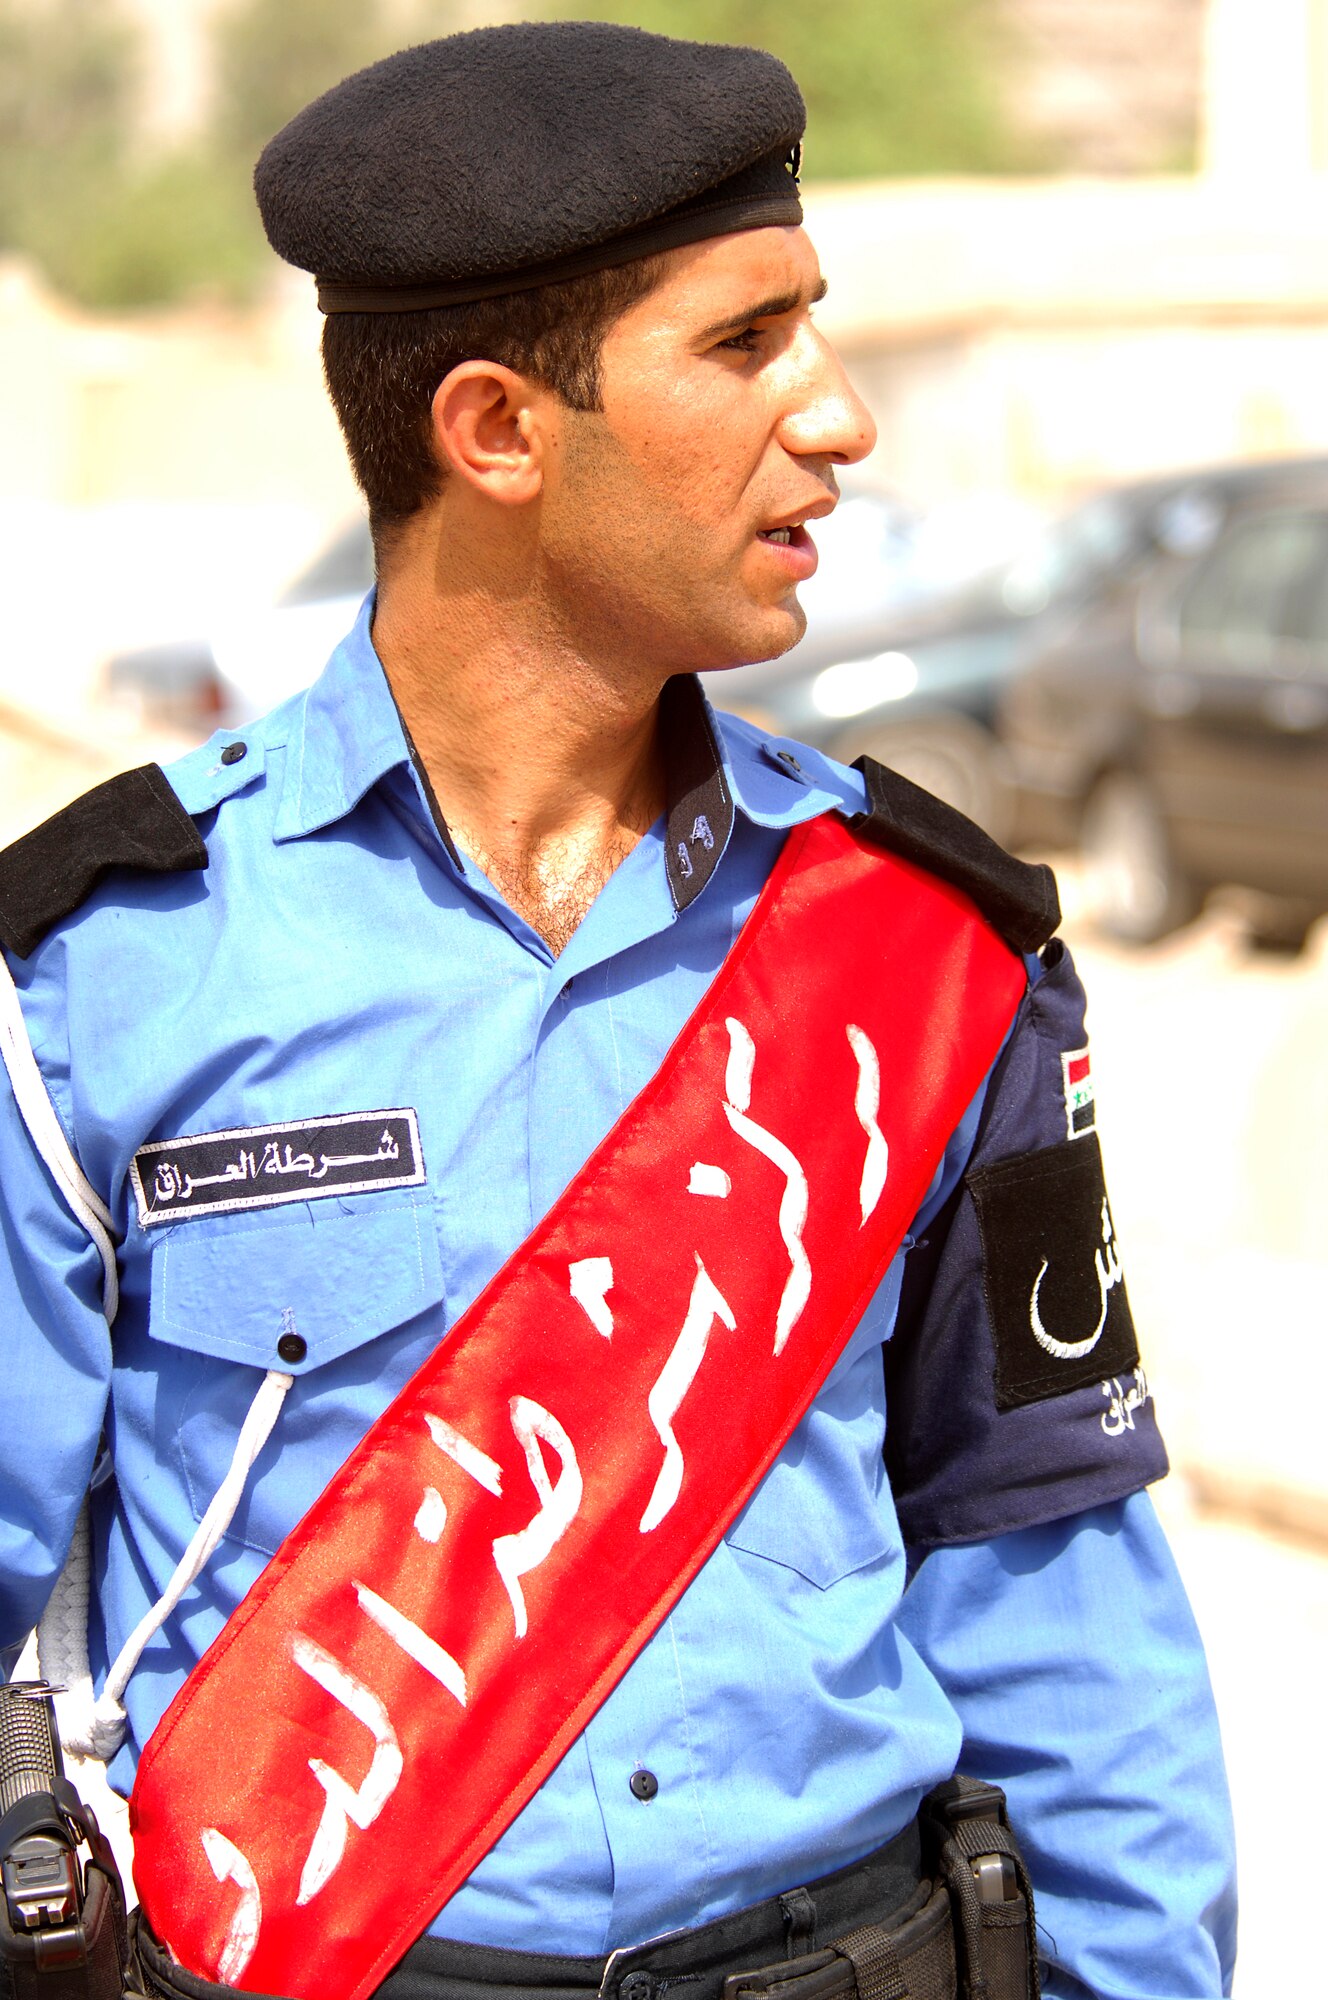 DOURA, IRAQ -- An Iraqi police officer gives instructions to other Iraqi policemen as they prepare to begin a combined patrol Aug. 30 with Airmen from the 732nd Expeditionary Security Forces Squadron, Det. 3 here. The combined patrol trained Iraqi police in tactics, techniques and procedures. The 732nd ESFS, Det. 3 is based at Victory Base in Baghdad with more than 150 Joint Source Solution Airmen performing Police Transition Team missions at six Iraqi police stations and one Iraqi police district headquarters in the East and West Rasheed Districts of Baghdad, in addition to manning two 24-hour Joint Security Stations. JSS Airmen are assigned duties outside their normal Air Force specialties to fill in vacant positions that Soldiers cannot support due to the Army's heavy theater operations tempo. (U.S. Navy photo/Petty Officer 2nd Class Kelvin T. Surgener)  